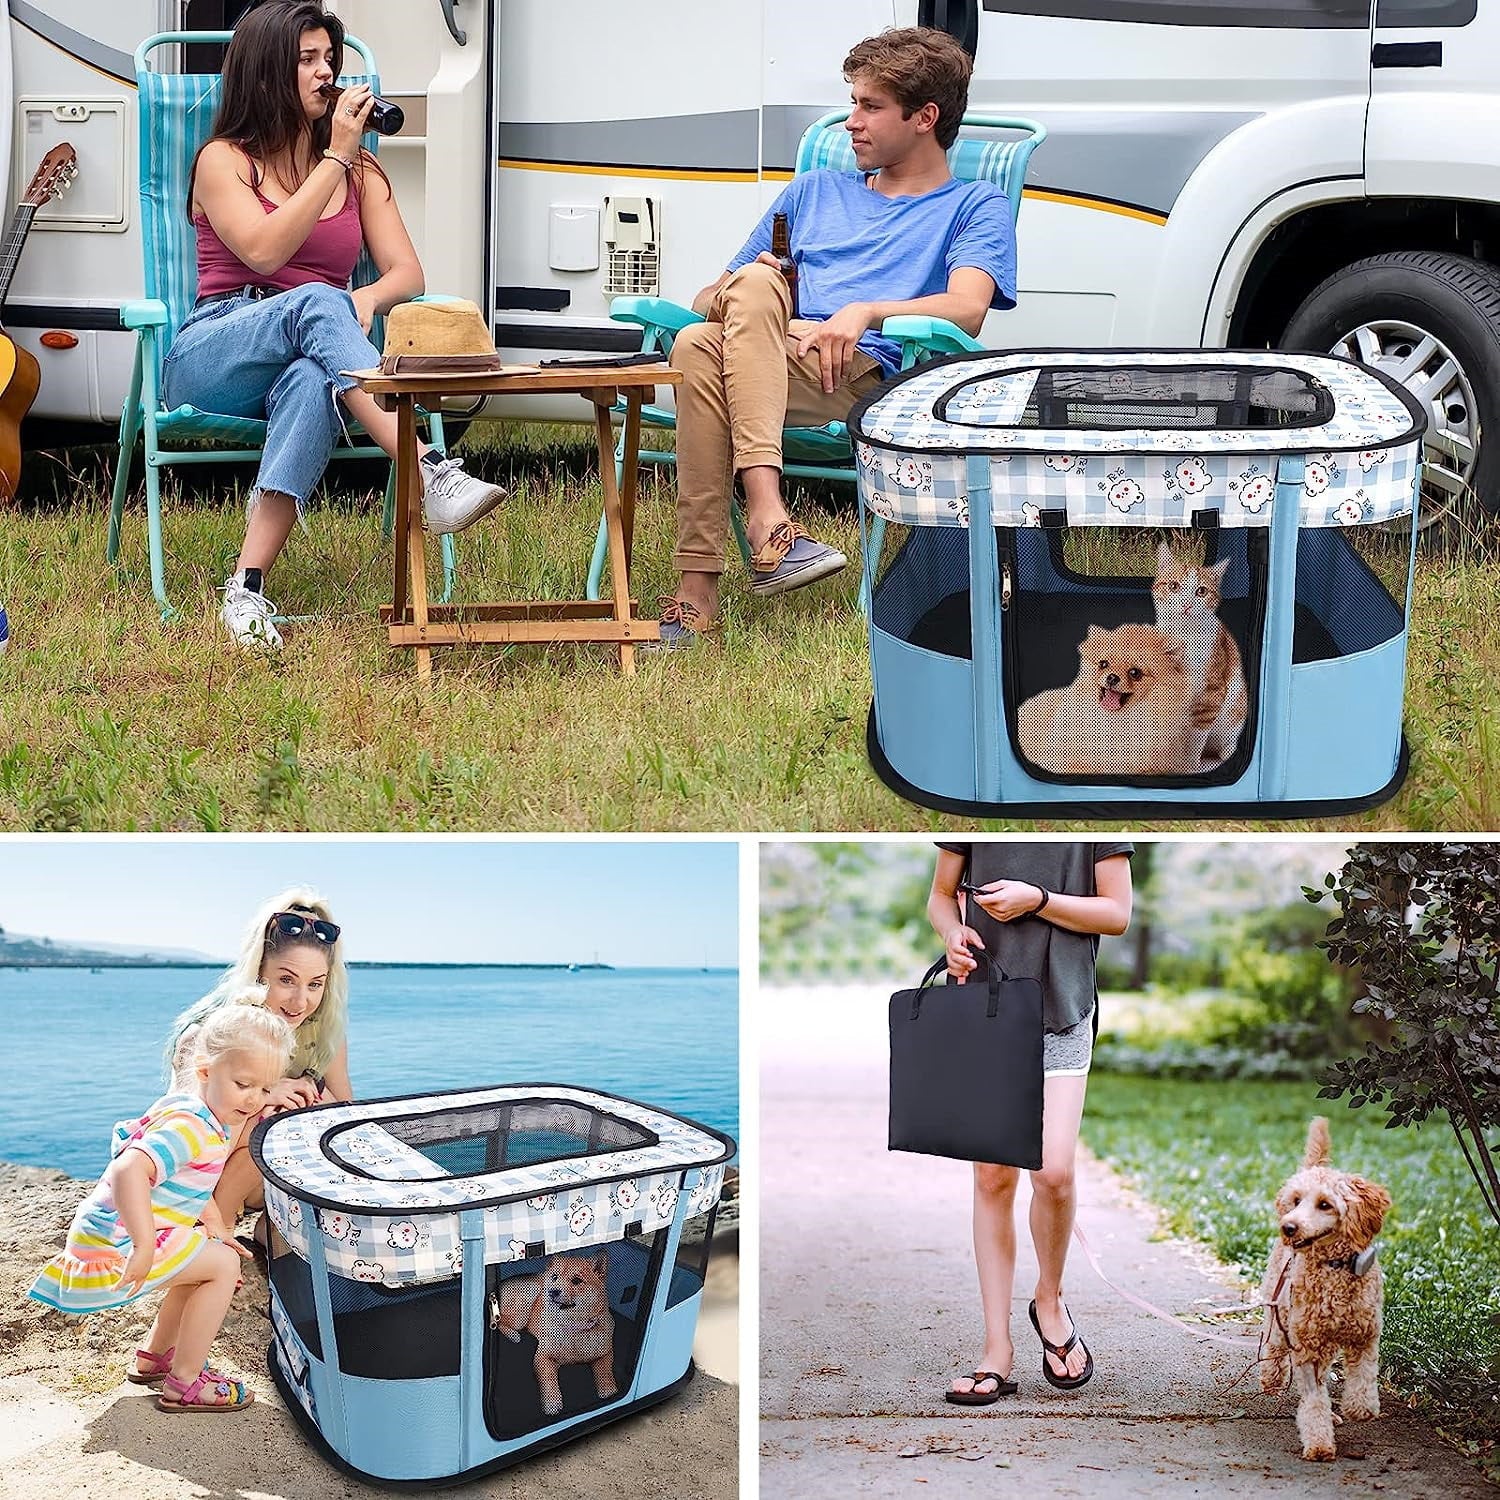 Portable Pet Playpen Premium Large Size Puppy Kennel - Best for Small and Medium Size Dogs and Cats - Simple Folding Design for Easy Storage